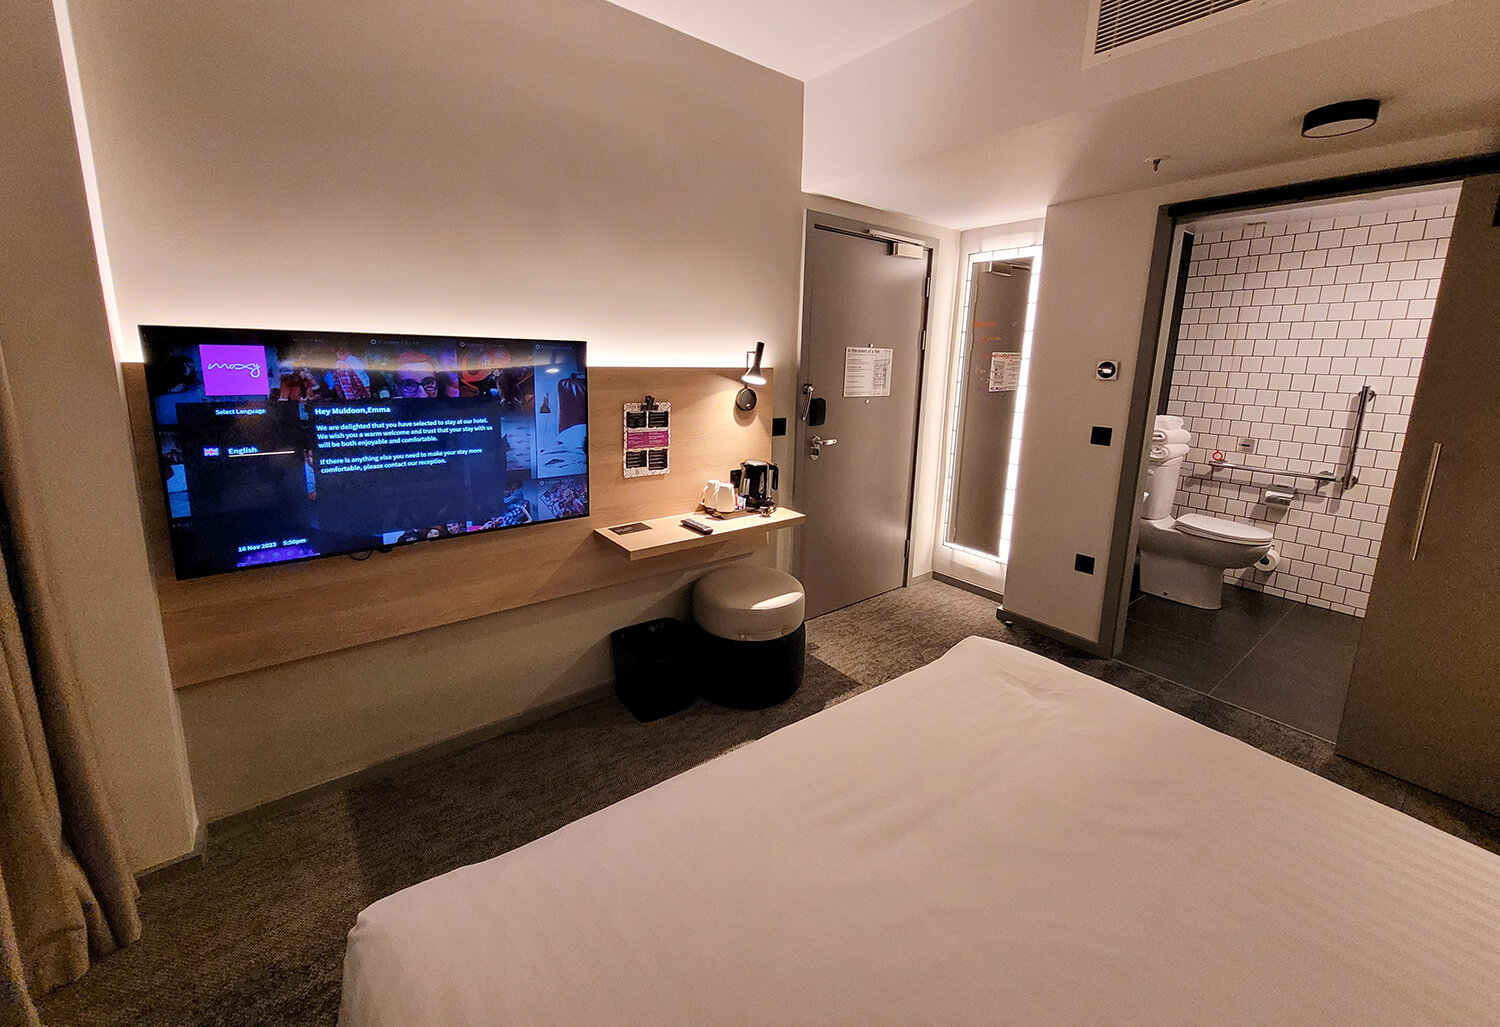 A view looking across the accessible room at the Moxy Manchester City hotel.